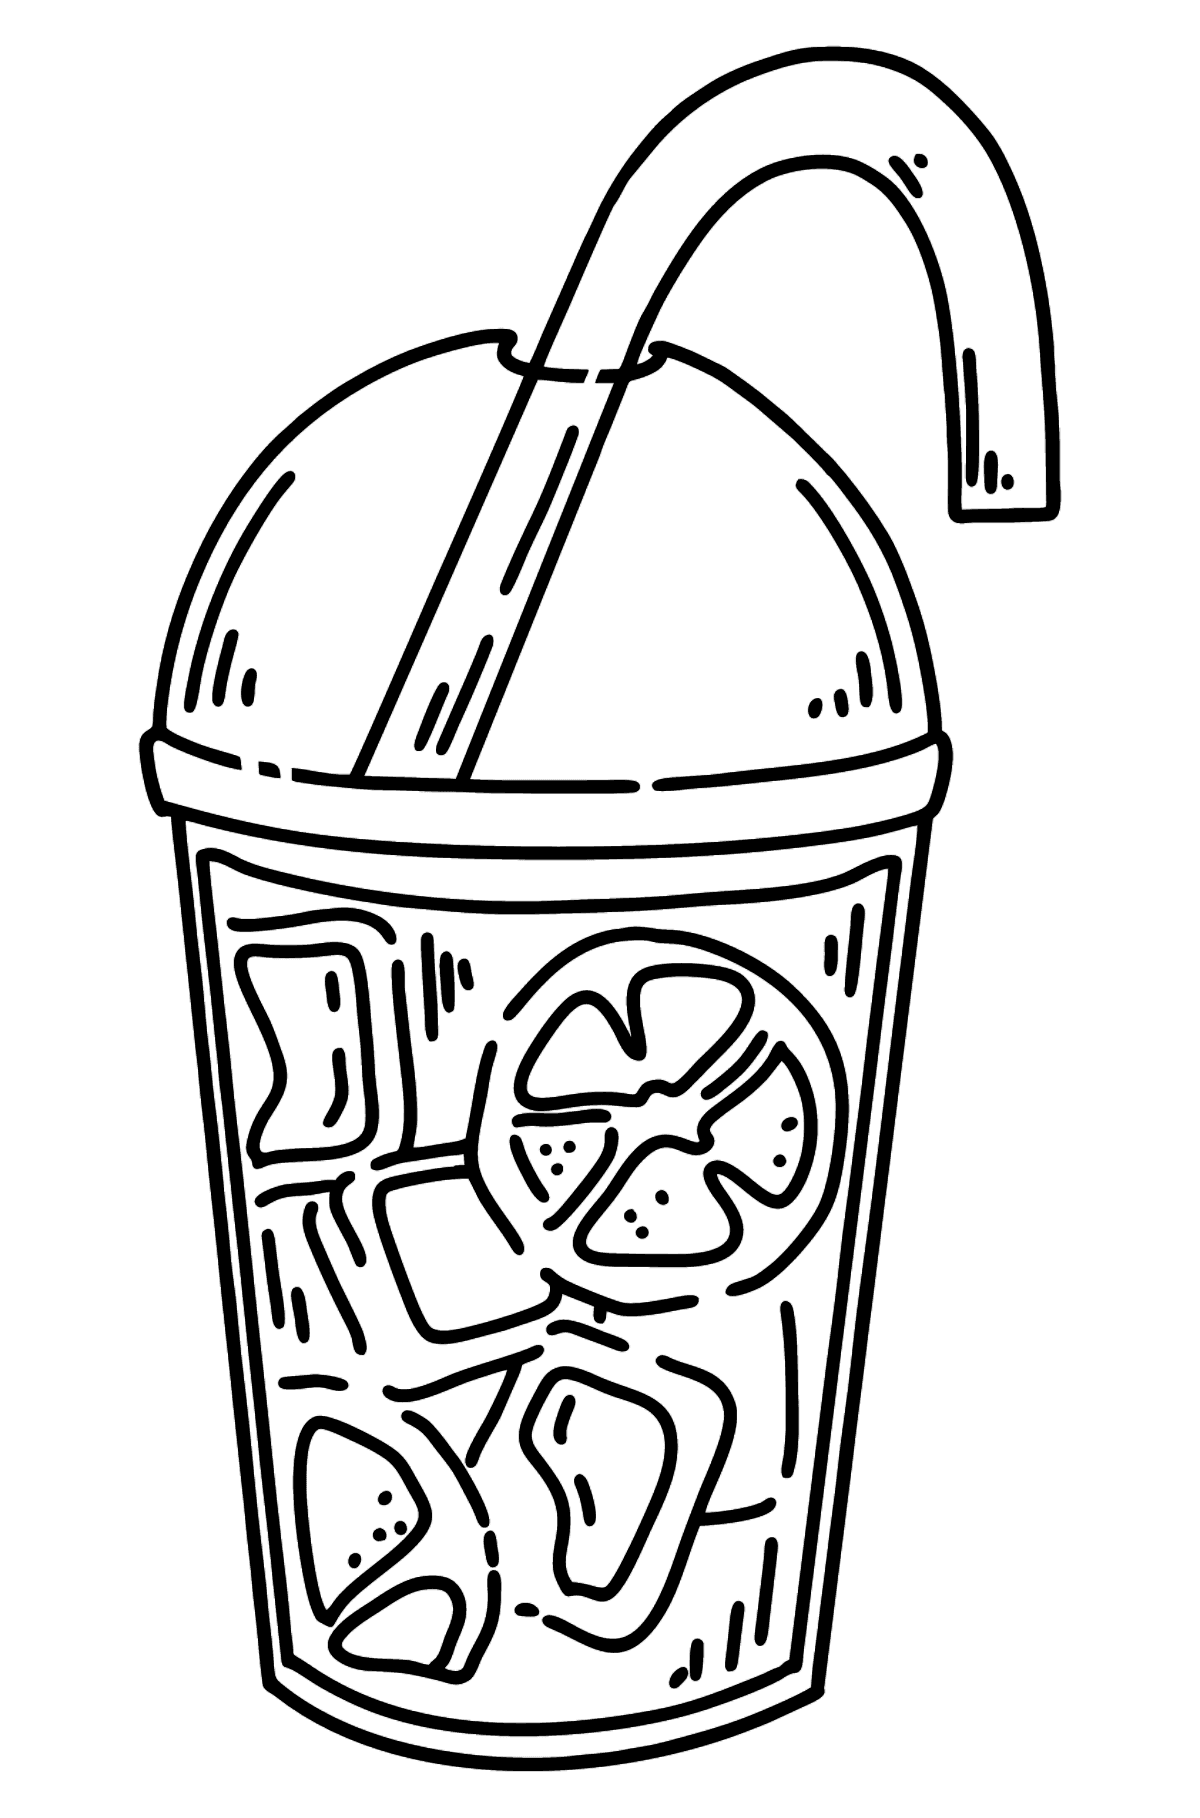 Lemonade in a Glass coloring page - Coloring Pages for Kids